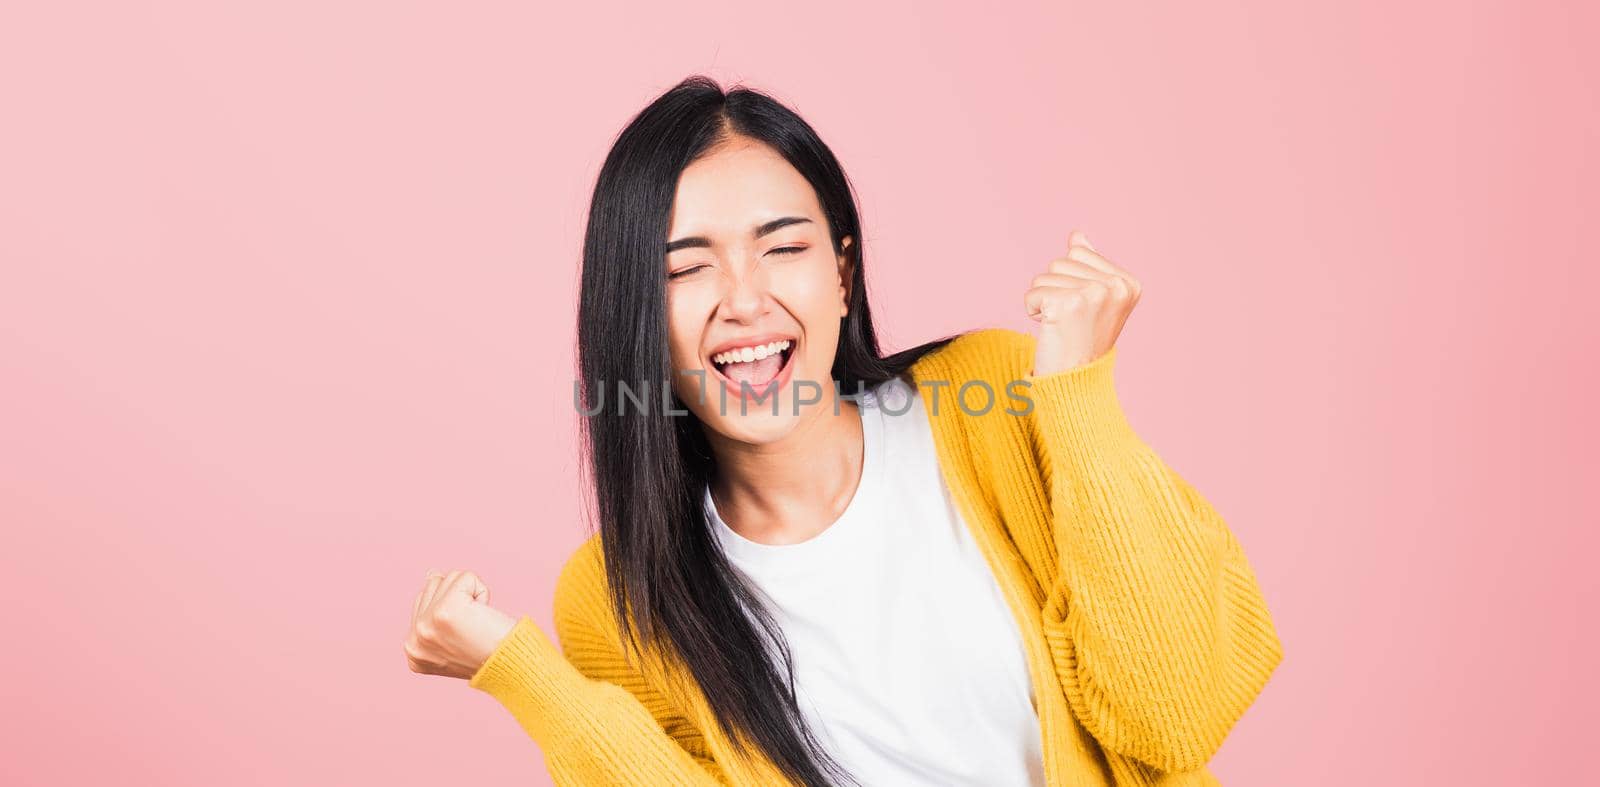 woman standing winning and surprised excited screaming by Sorapop